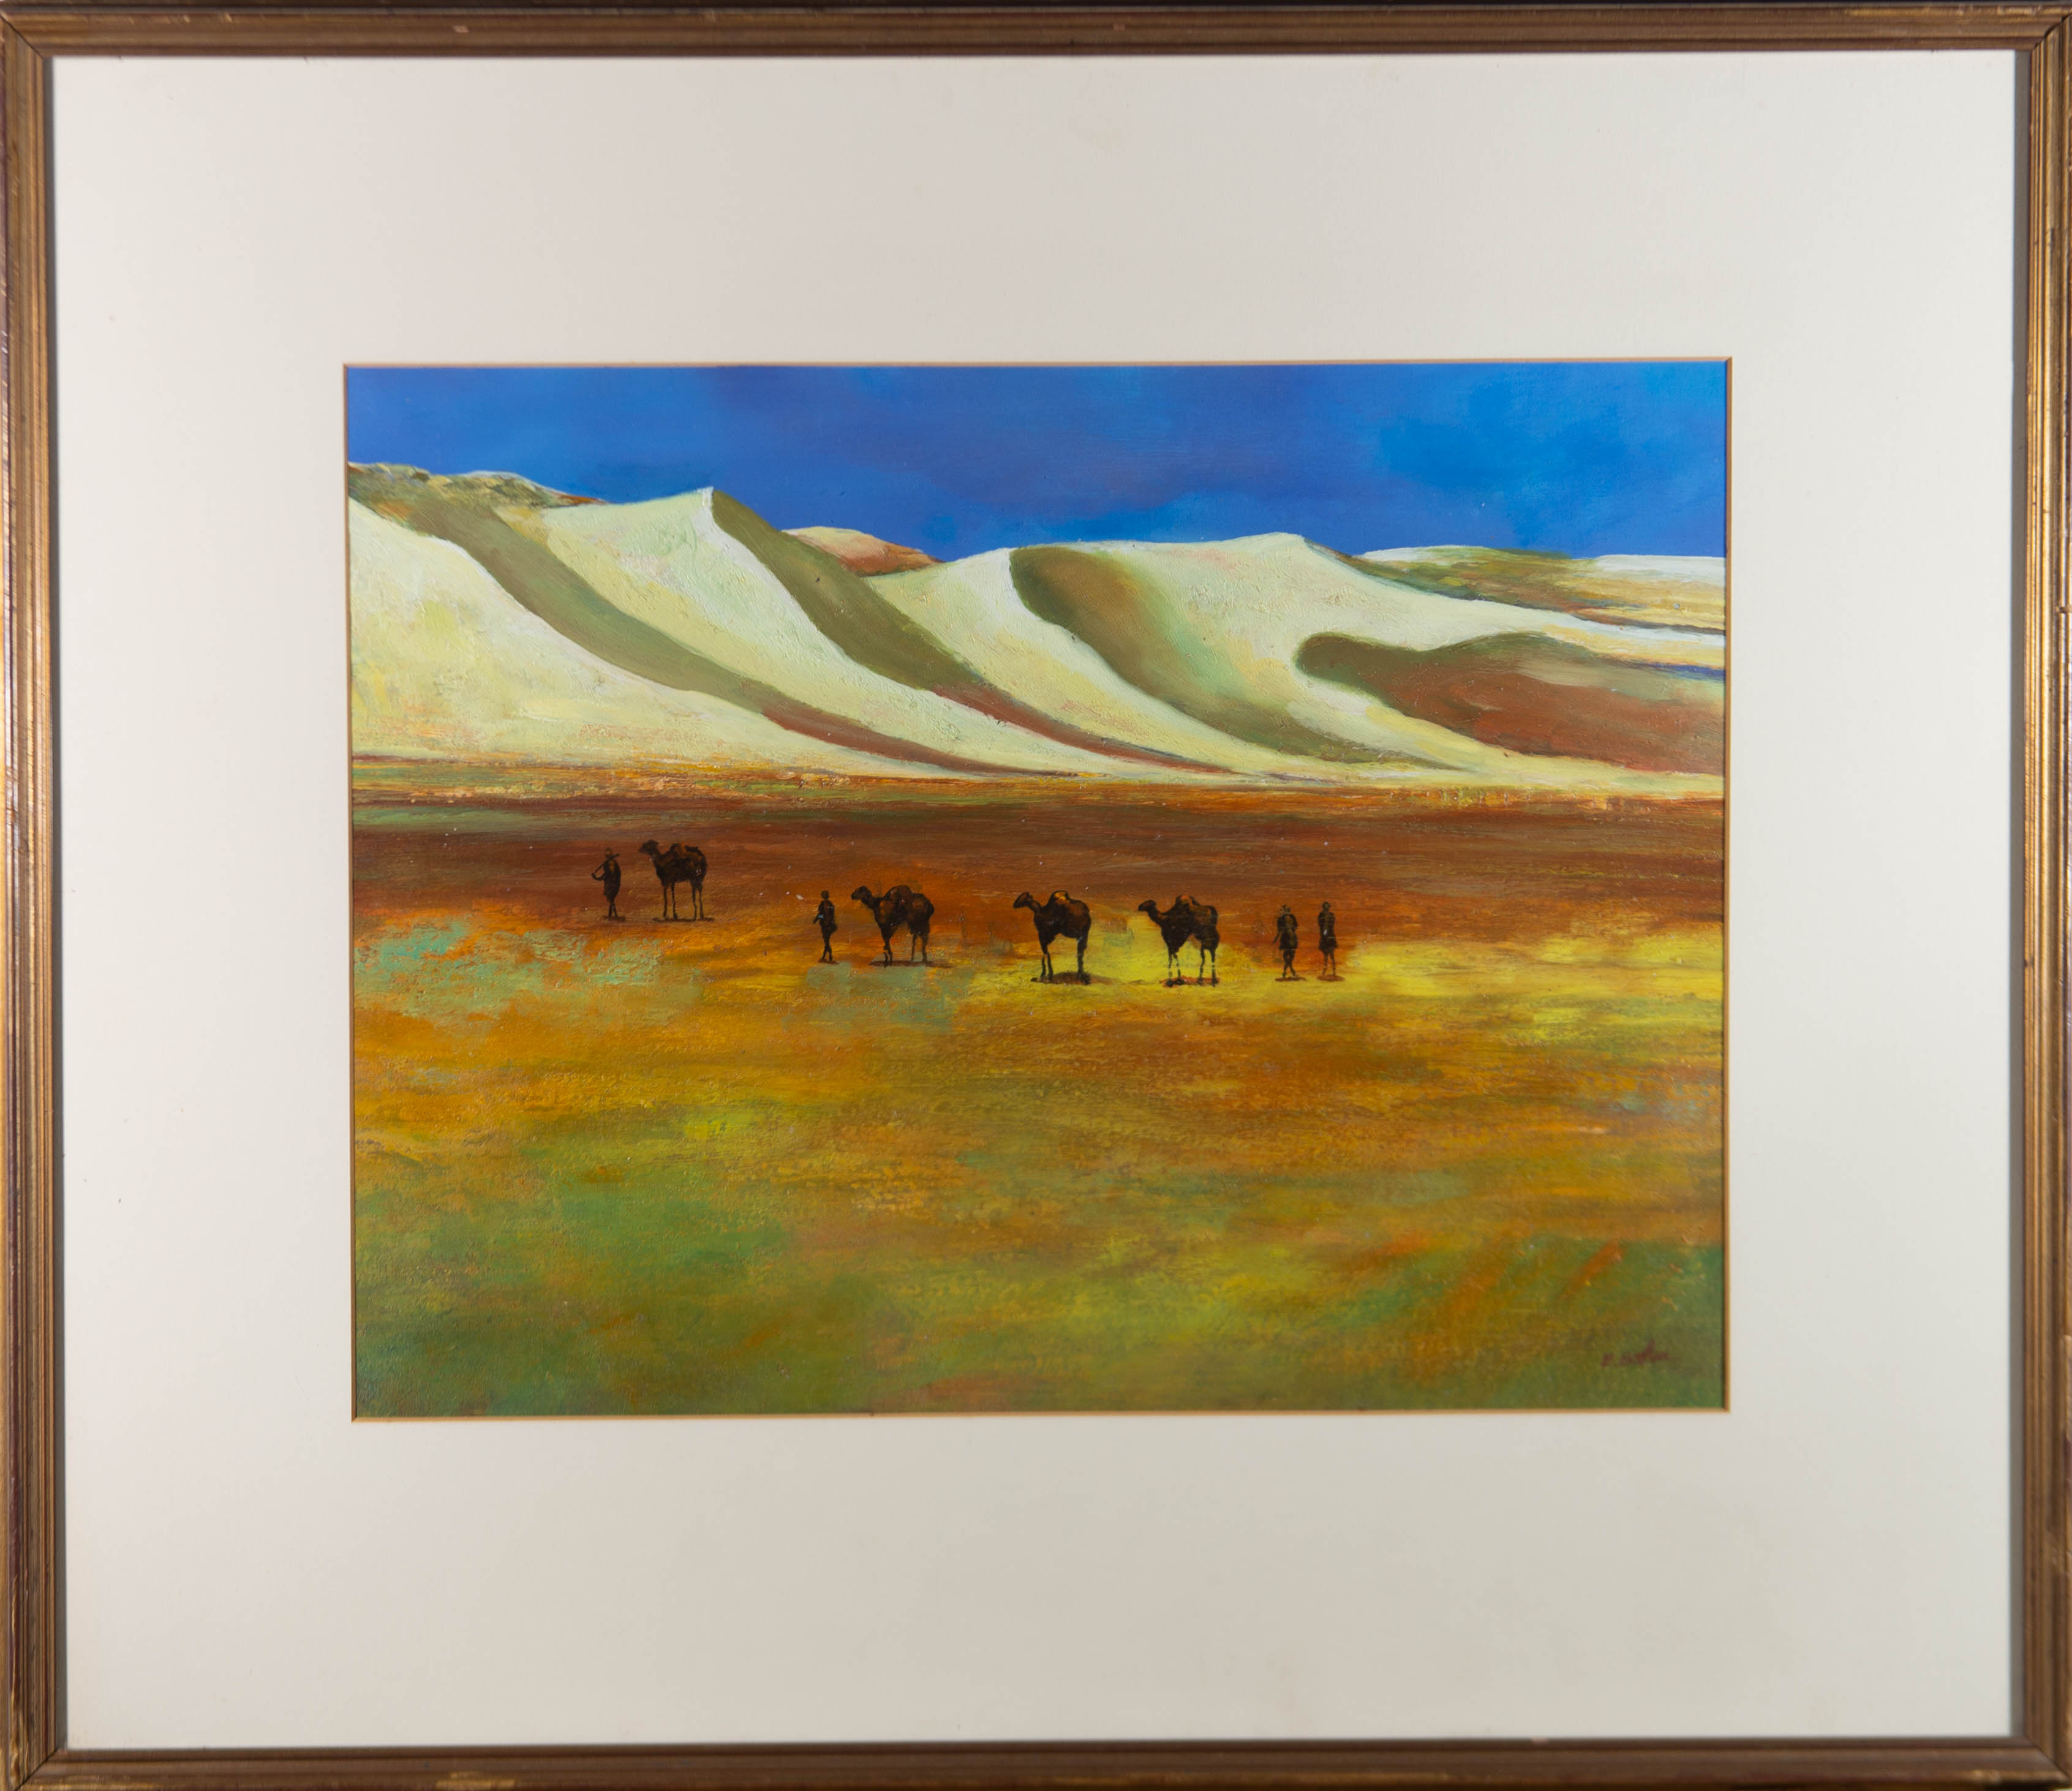 Unknown Landscape Painting - 20th Century Acrylic - Desert Landscape with Camels